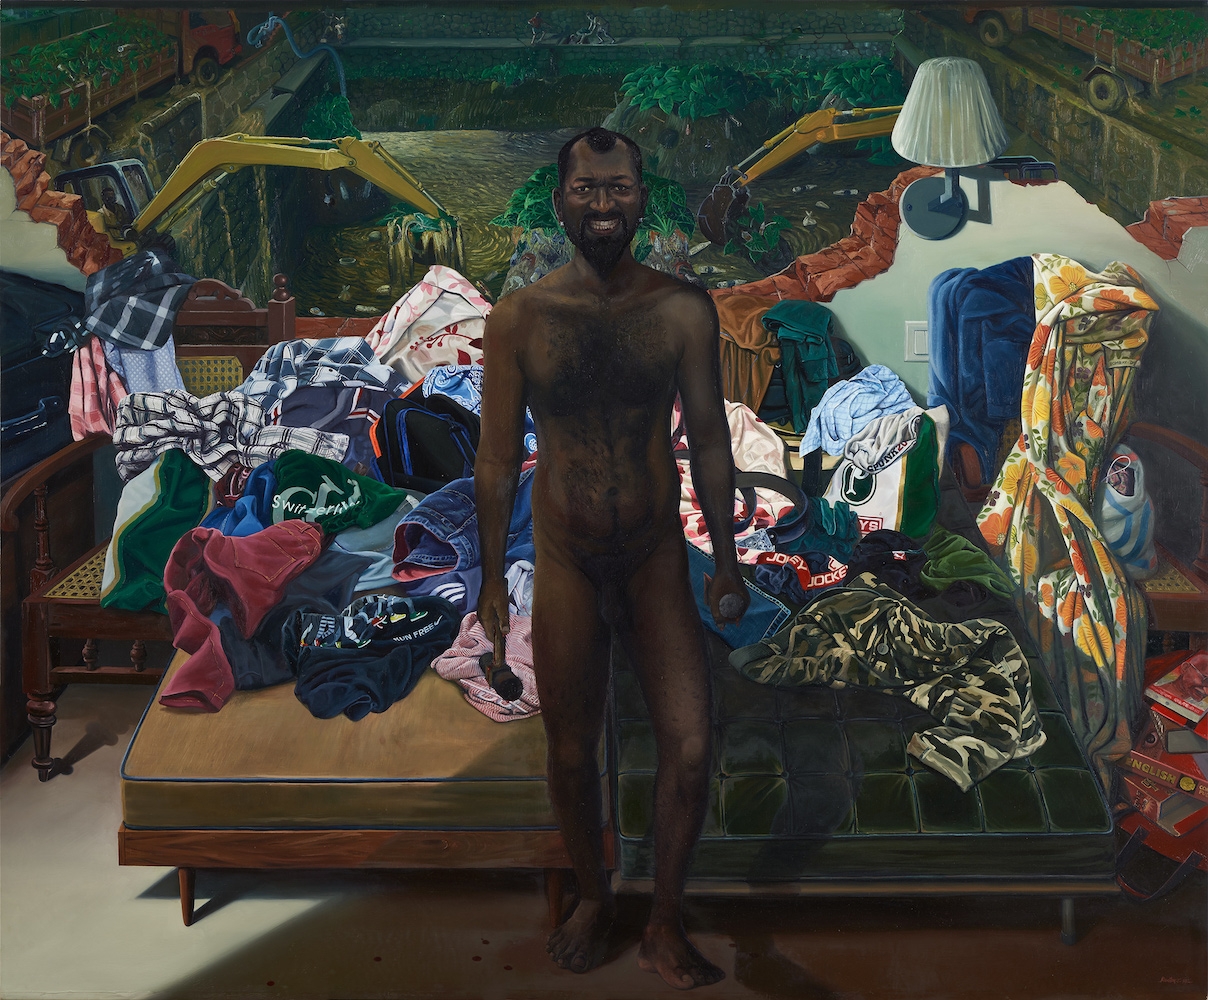 I Am (Cleaning Pond), 2015

Oil on canvas&amp;nbsp;

78 x 96 in / 198 x 244 cm